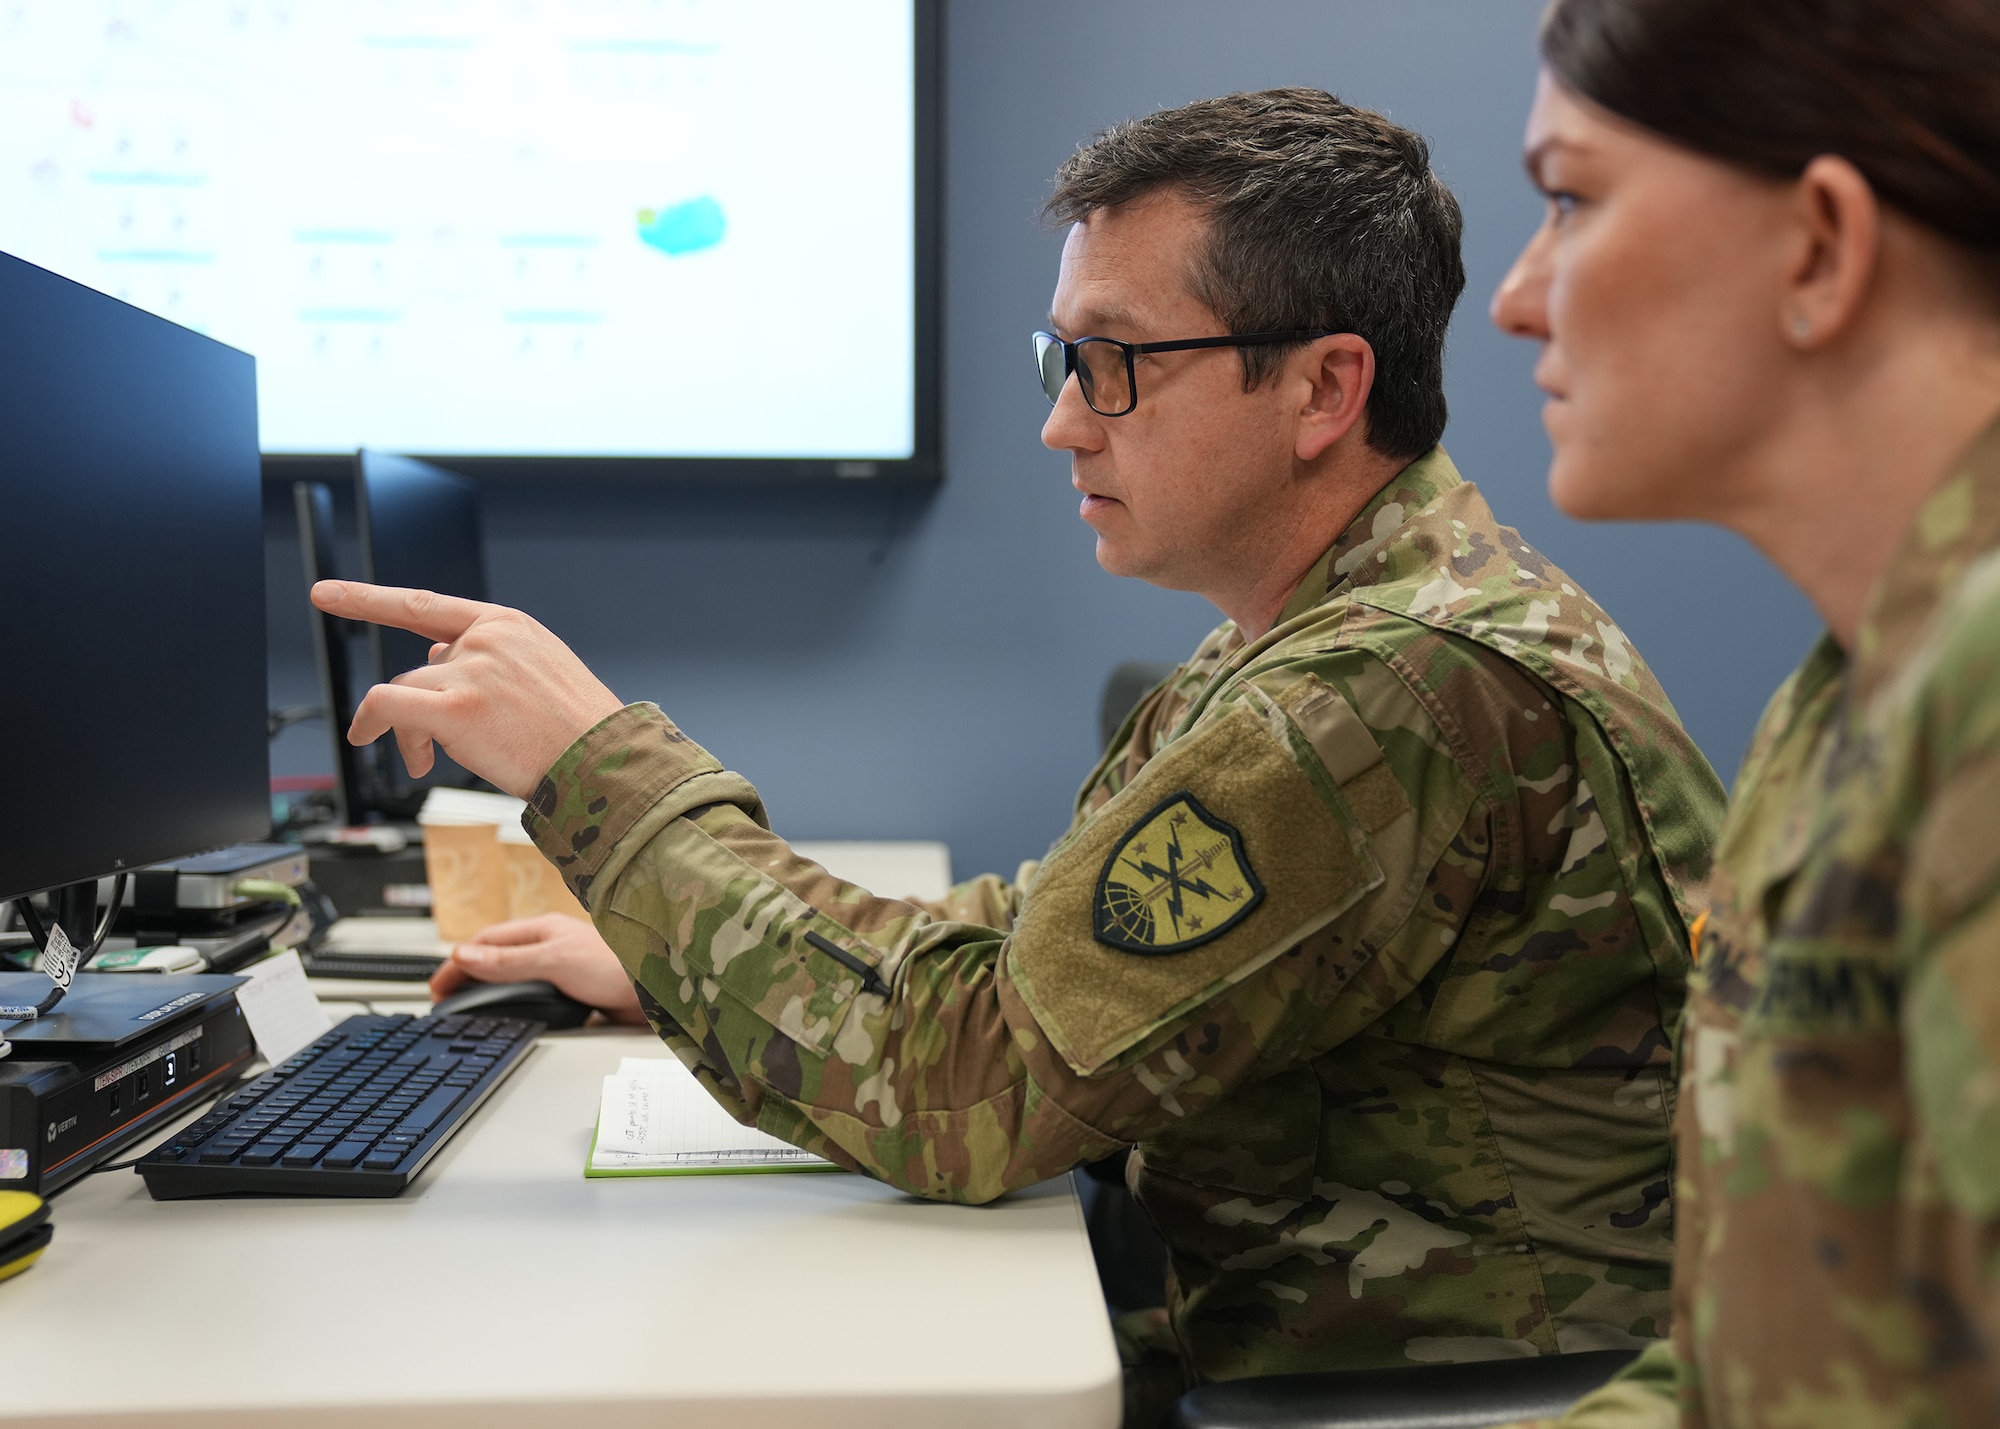 Alongside international partners from 23 countries, U.S. cyber operators test their skills and ability to detect enemy presence, expel it, and identify solutions to harden simulated networks during U.S. Cyber Command's CYBER FLAG 21-1 exercise.